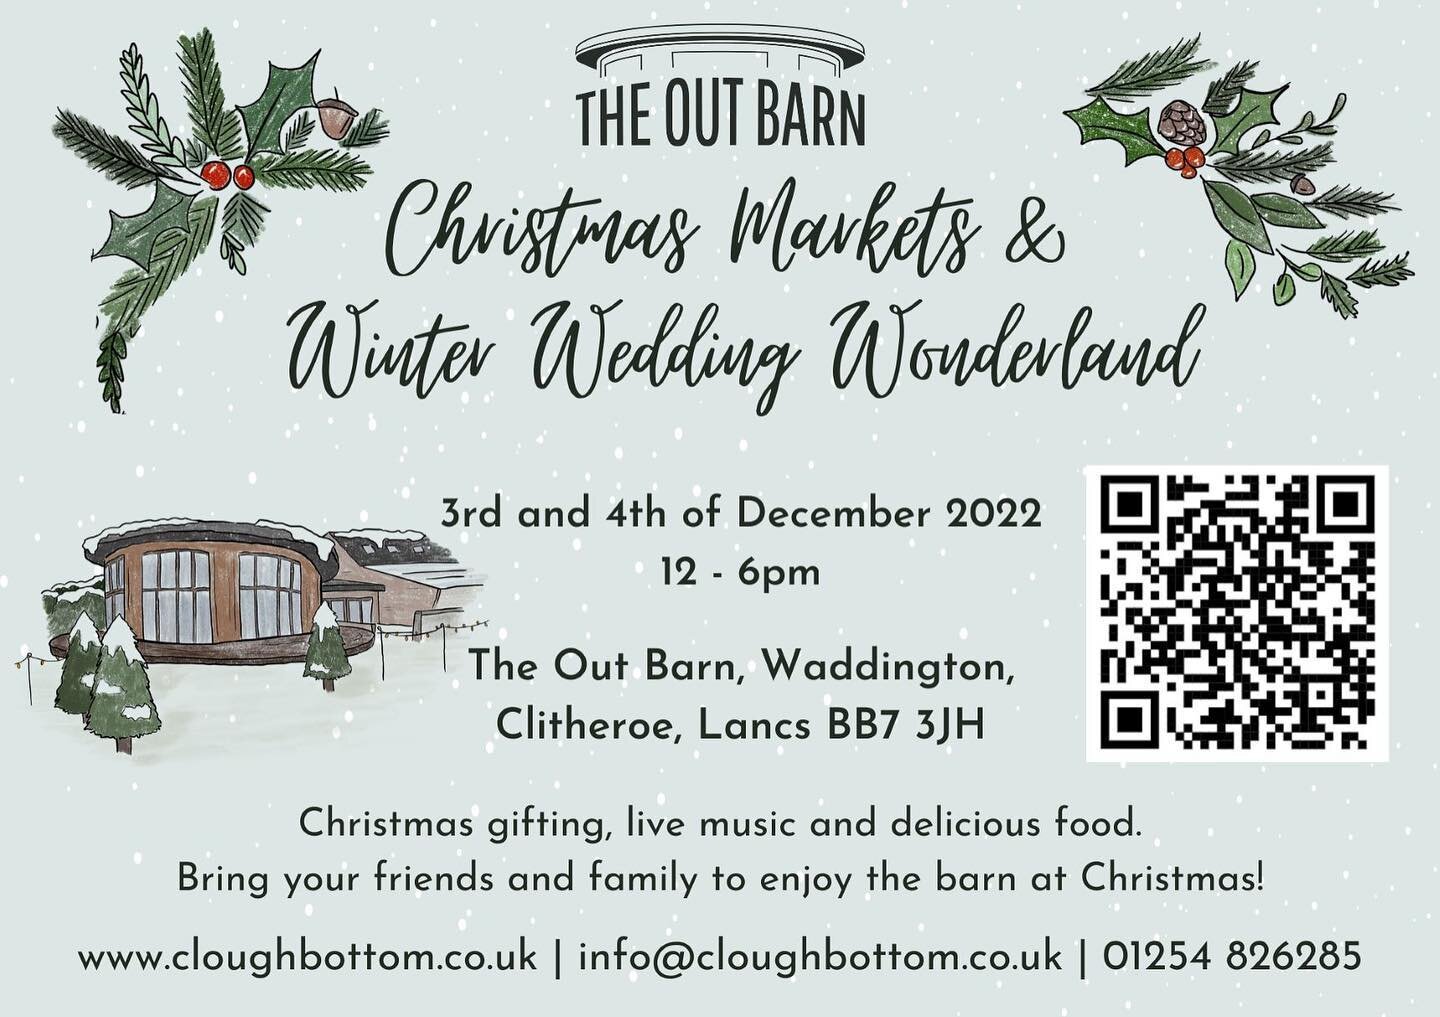 Evening all! Looking forward to having a stall @the_out_barn this Saturday (3rd Dec) for the Christmas Markets &amp; Winter Wedding Wonderland. Pop along to say hi and grab a few Christmas gifts from local businesses. #shedonthefell #ribblevalley #la